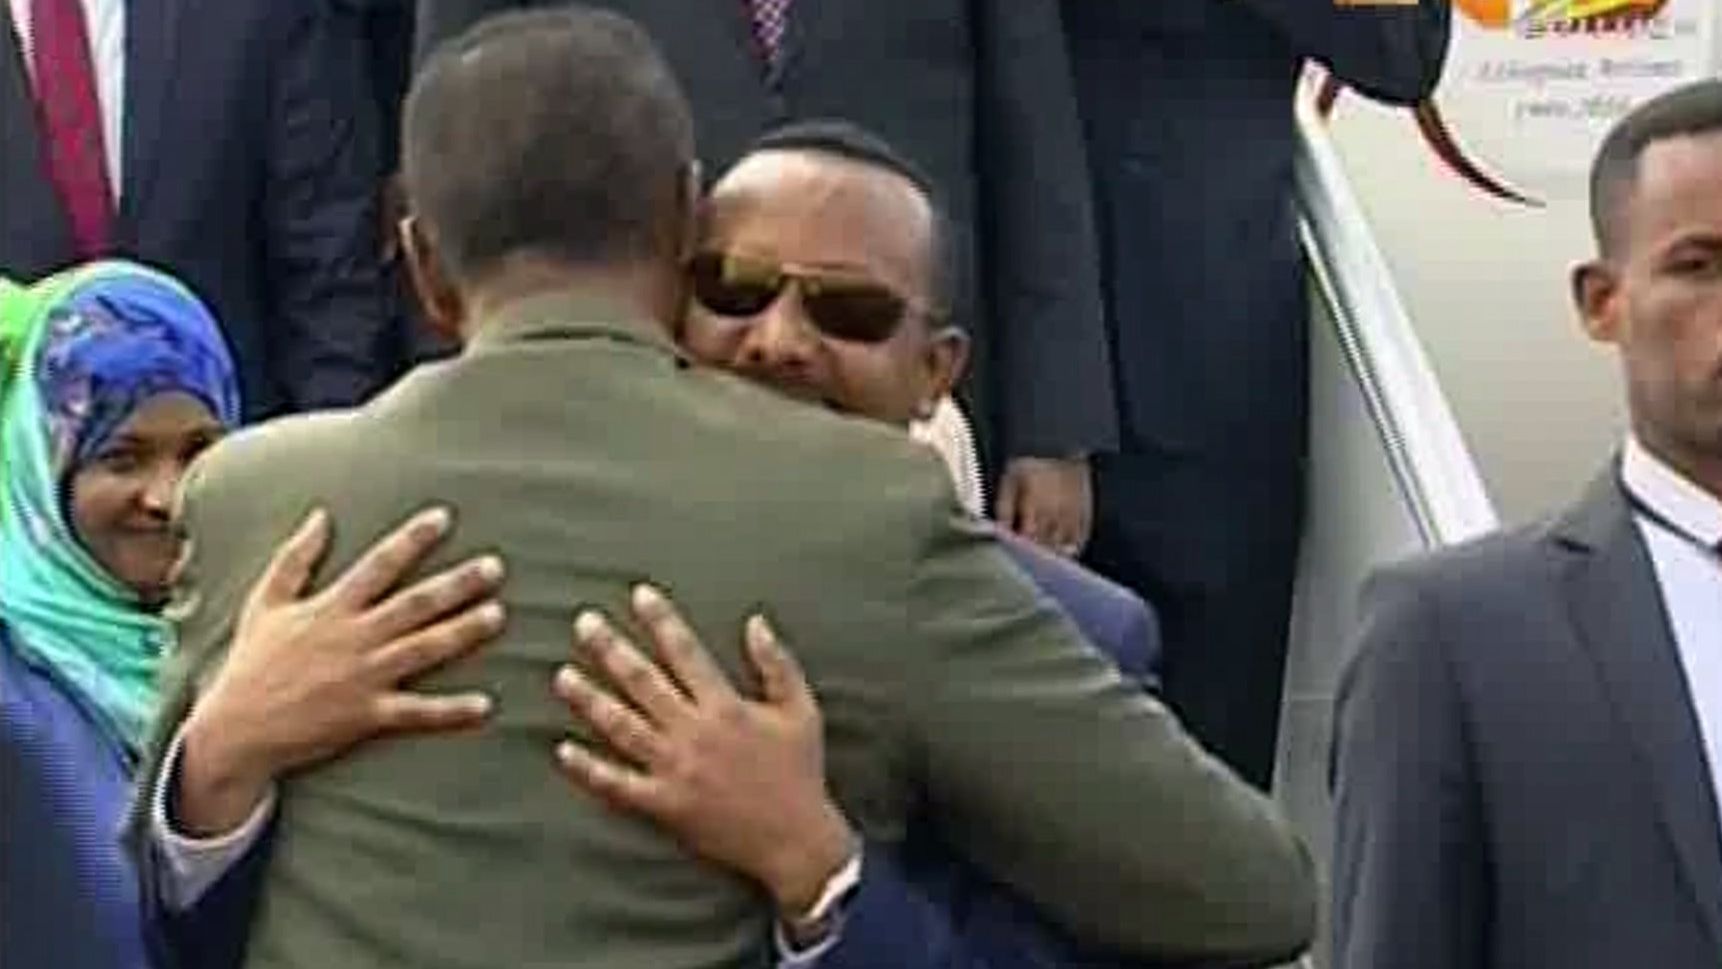 In this grab taken from video provided by ERITV, Ethiopia's Prime Minister Abiy Ahmed, background centre is welcomed by Eritrea's President Isaias Afwerki as he disembarks the plane, in Asmara, Eritrea, Sunday, July 8, 2018.
